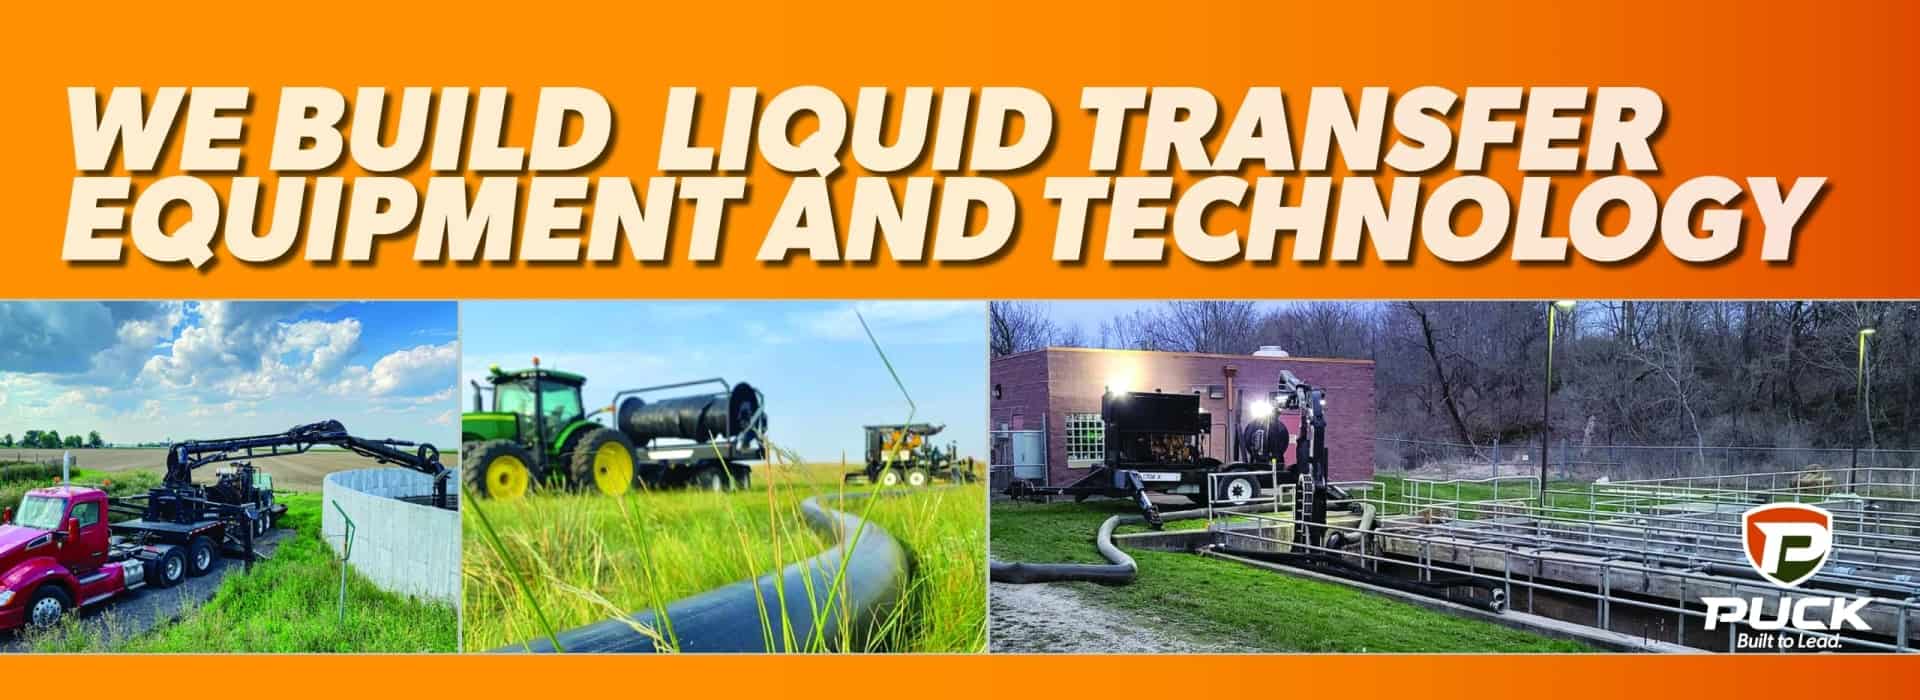 we build liquid transfer equipment and technology